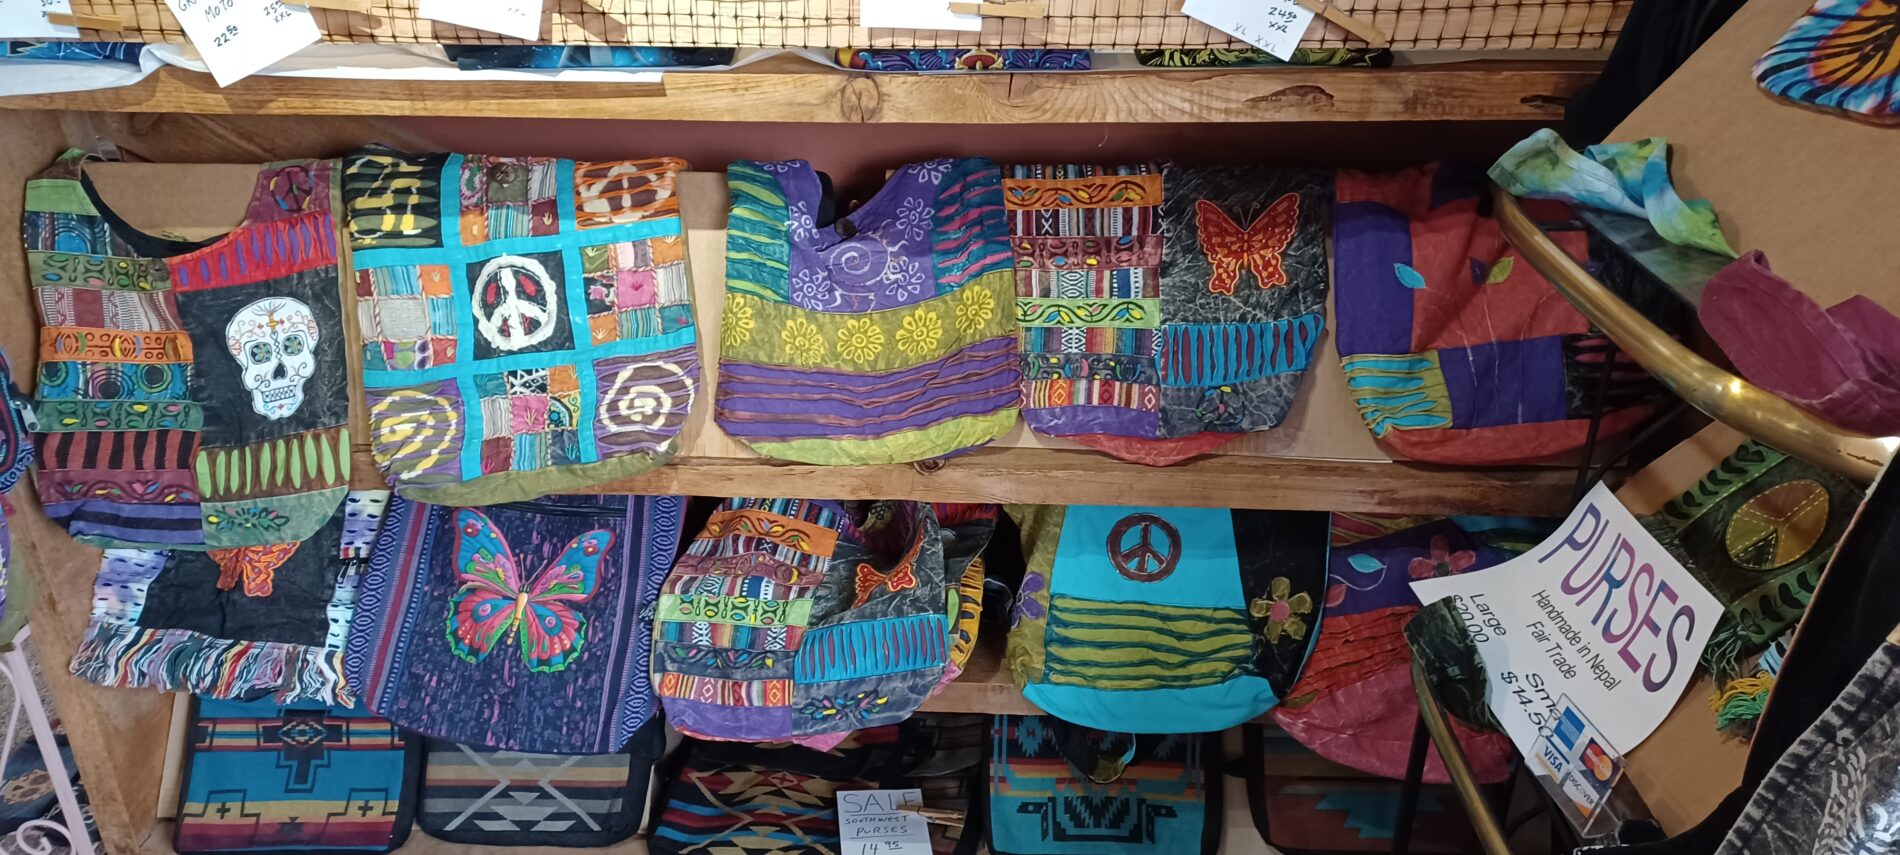 A display of colorful bags and other items in a store.